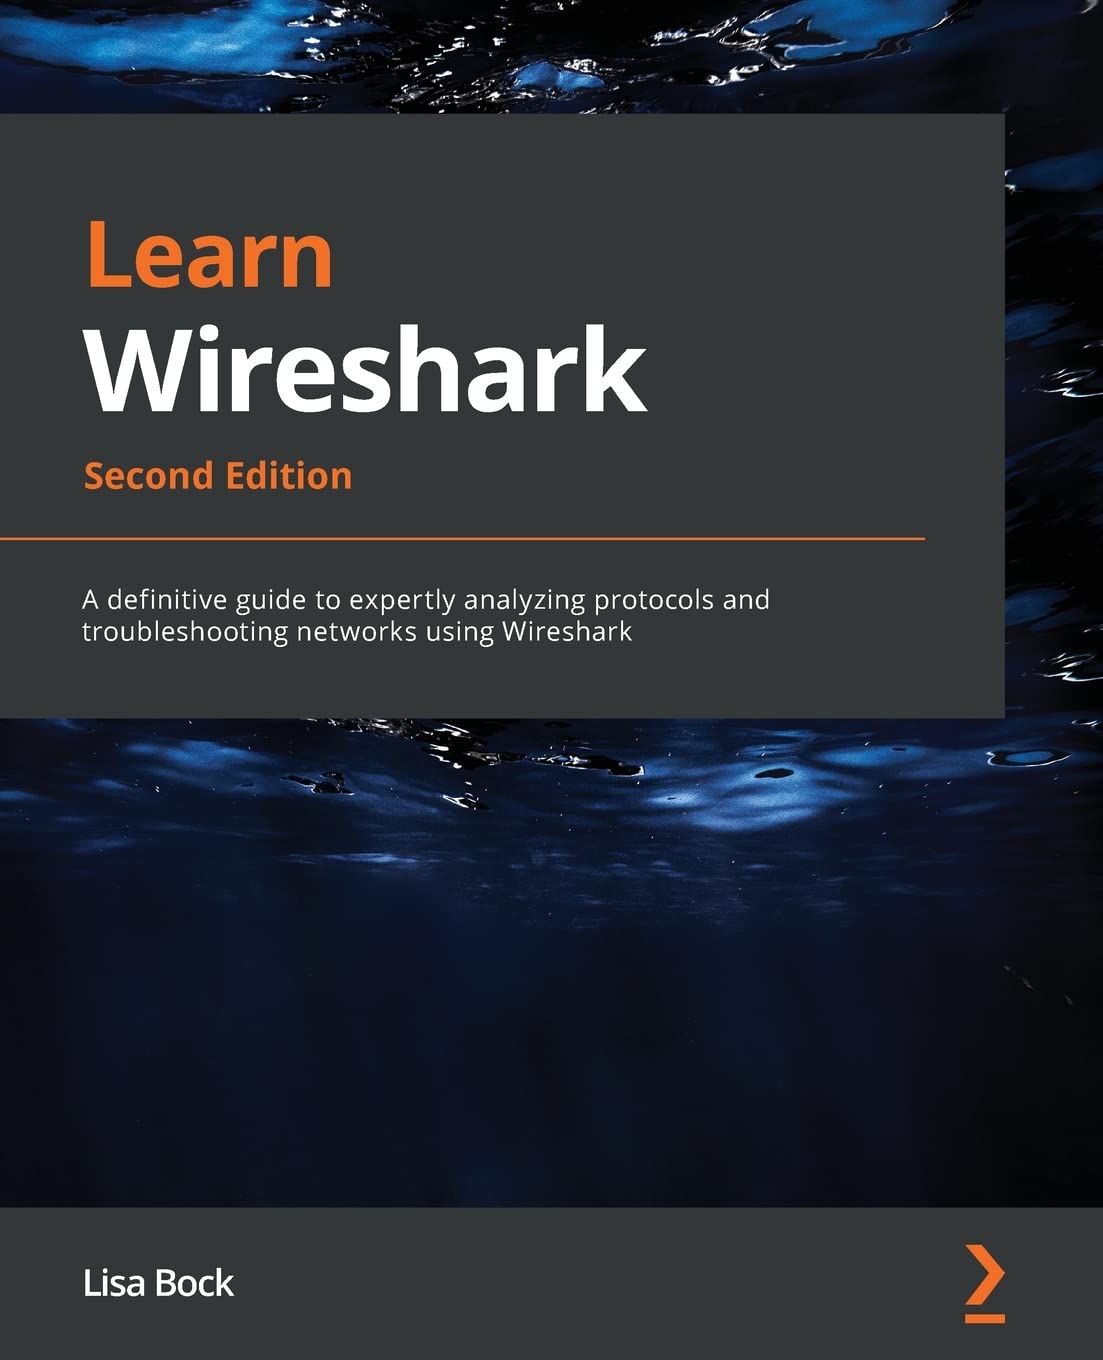 Learn Wireshark: A definitive guide to expertly analyzing protocols and troubleshooting networks using Wireshark, 2nd Edition by  Lisa Bock